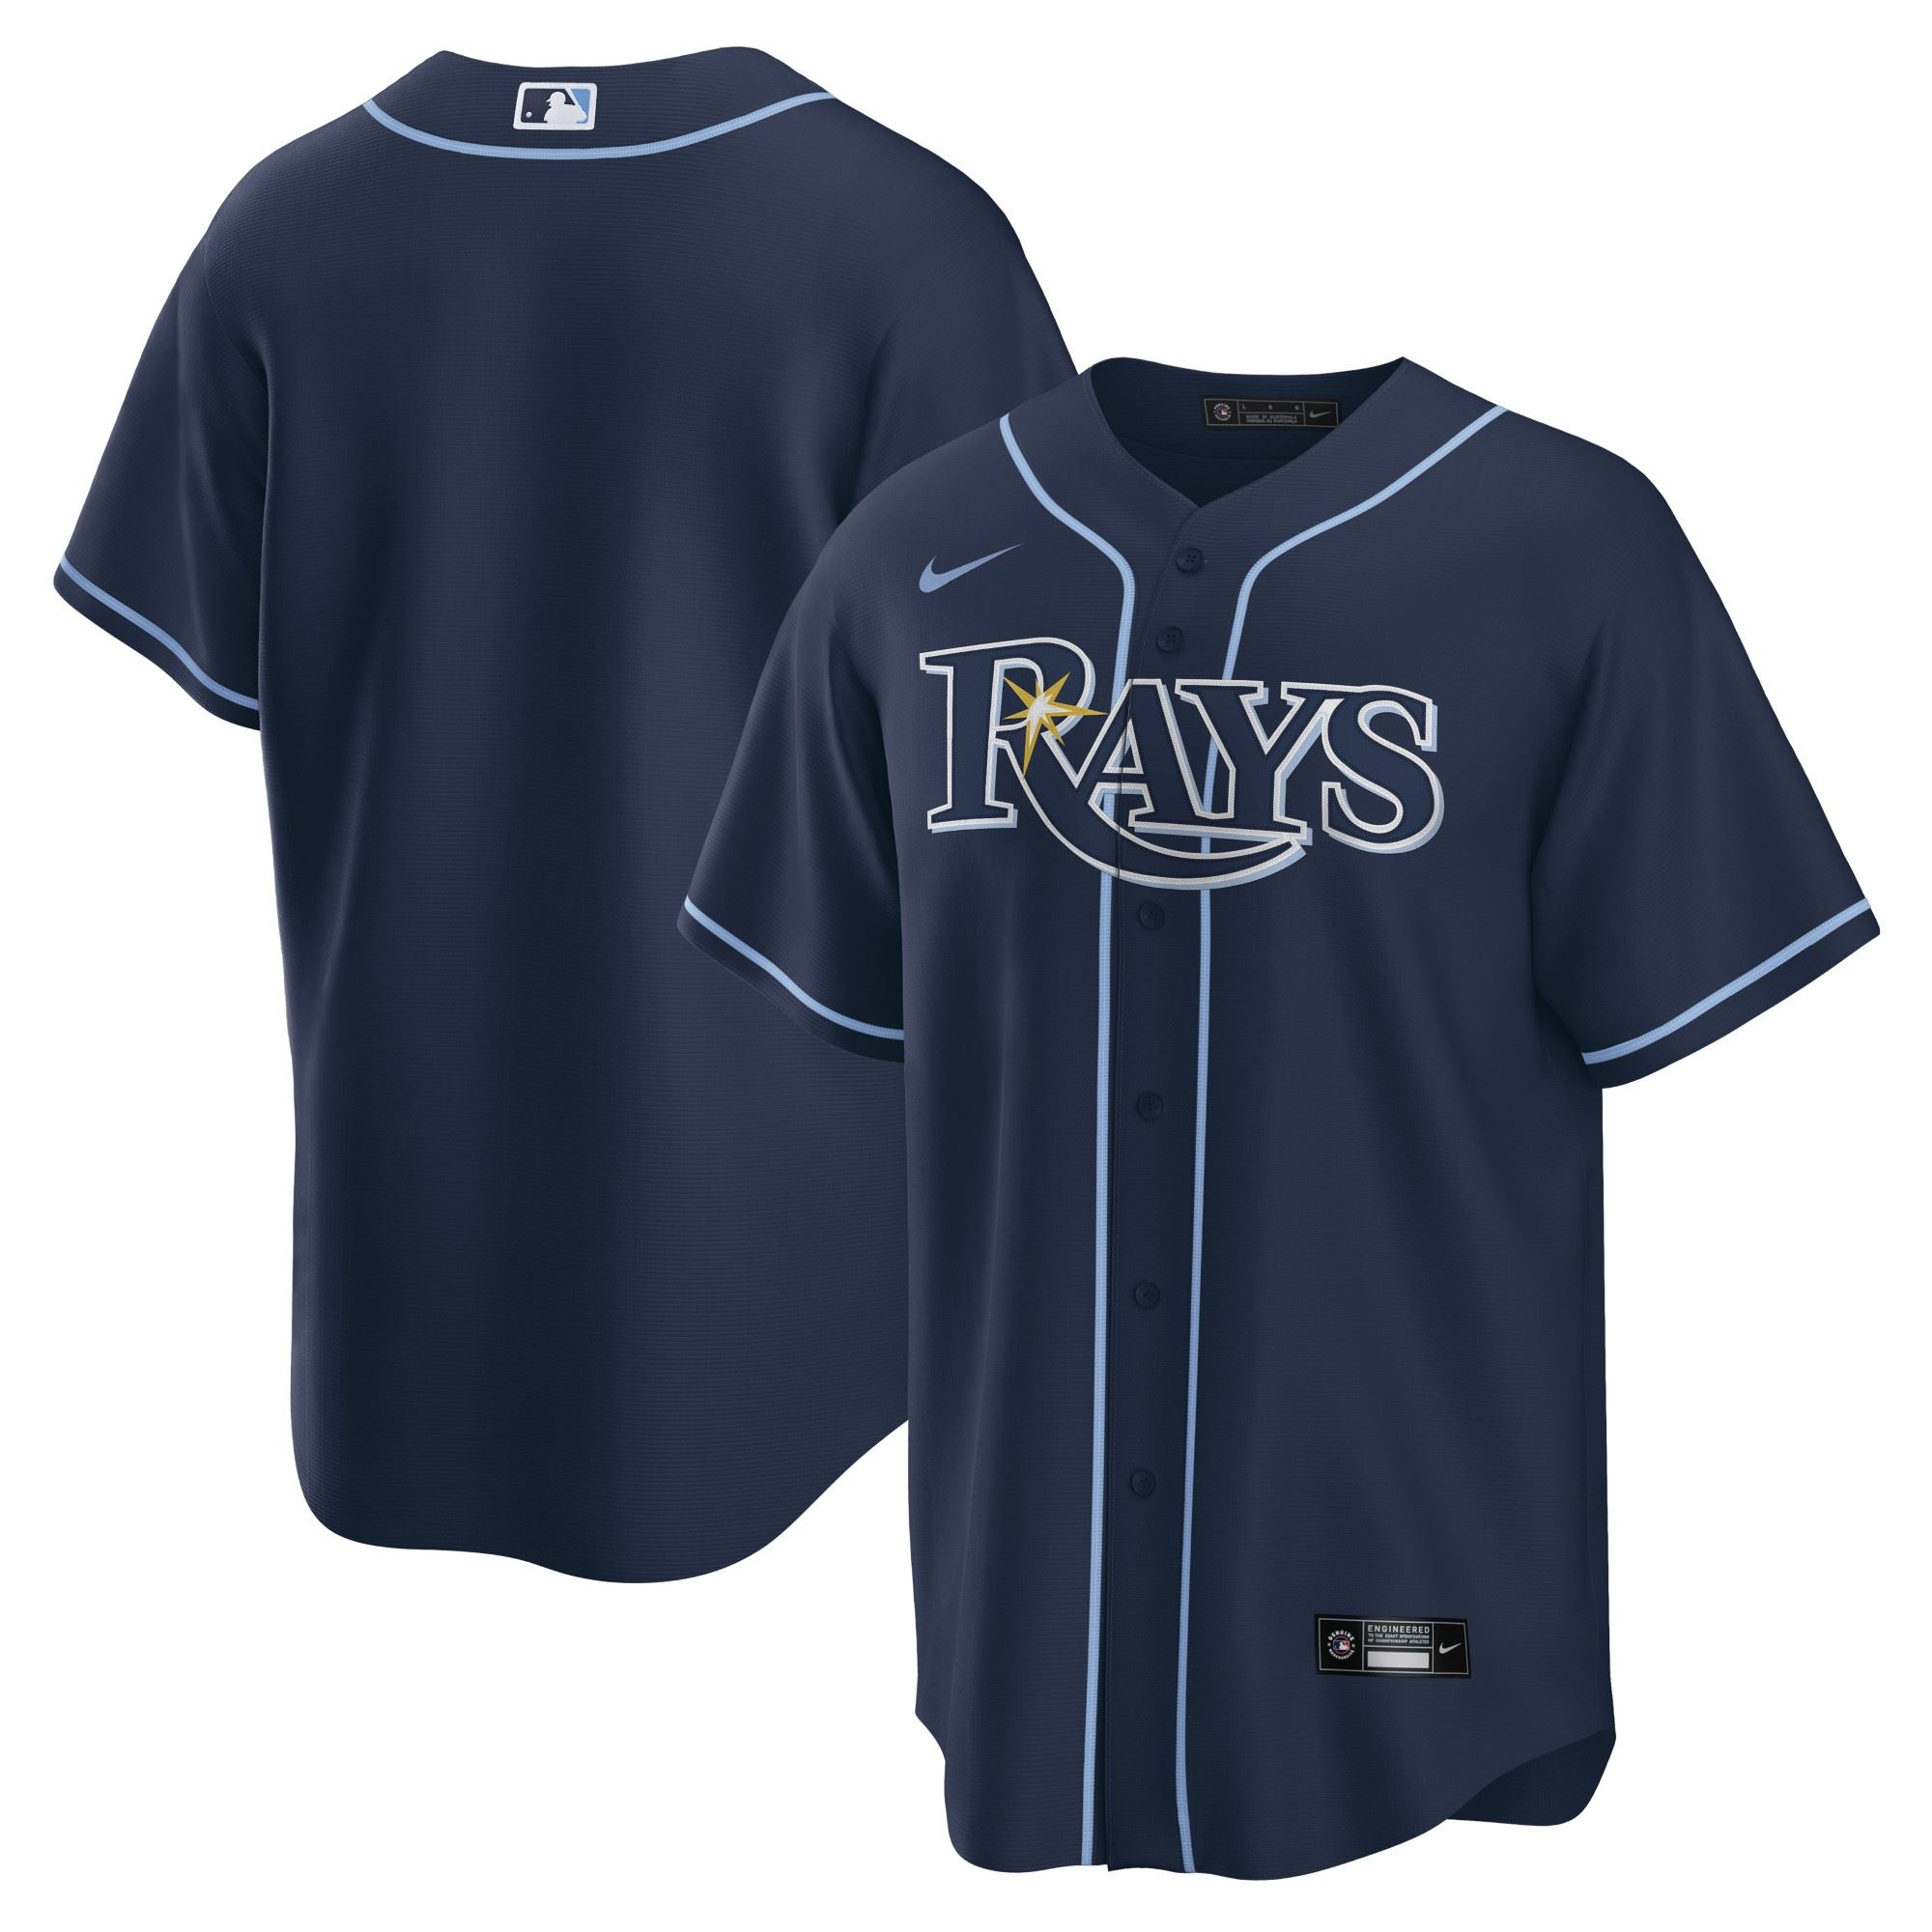 Tampa Bay Rays Blue Official MLB Replica Alternate Jersey Nike